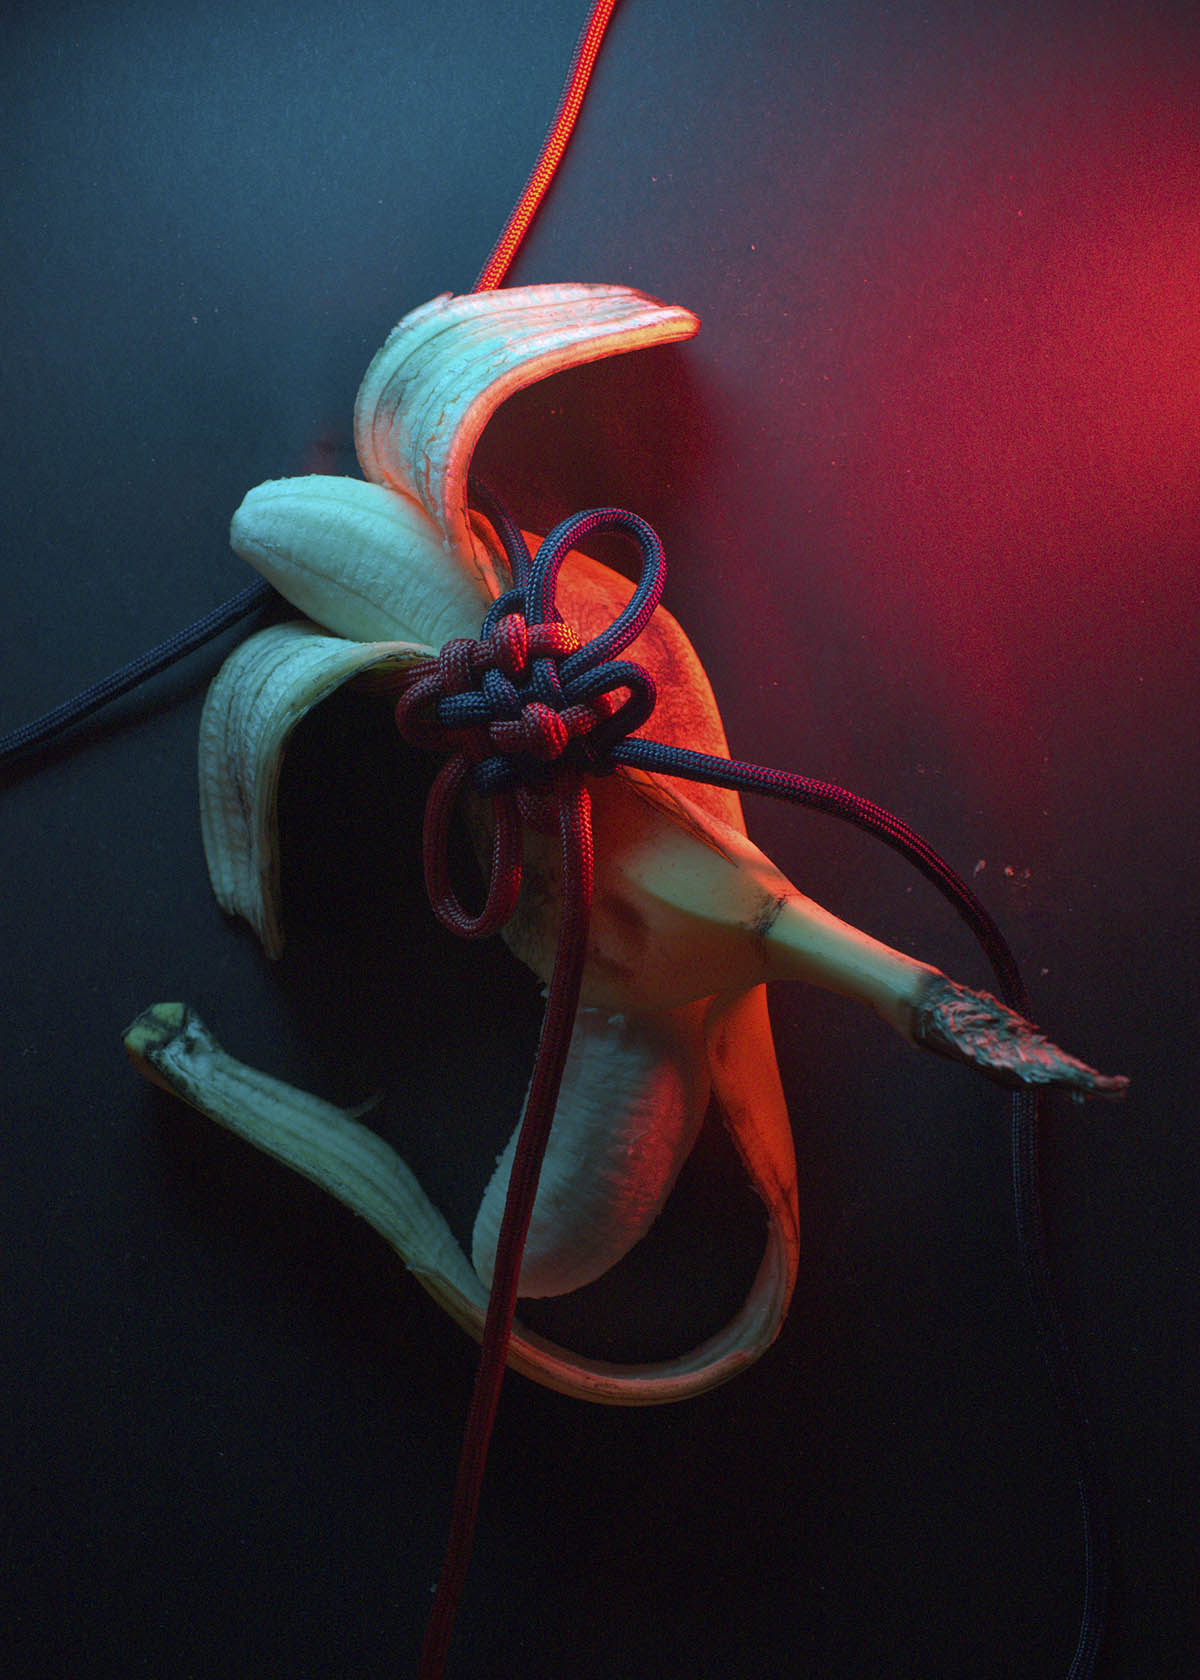 A peeled banana with the peel laying over the banana and encasing it on both sides. A blue rope and a red rope tied together with a decorative knot holds the banana skin to the flesh on top of a black background.